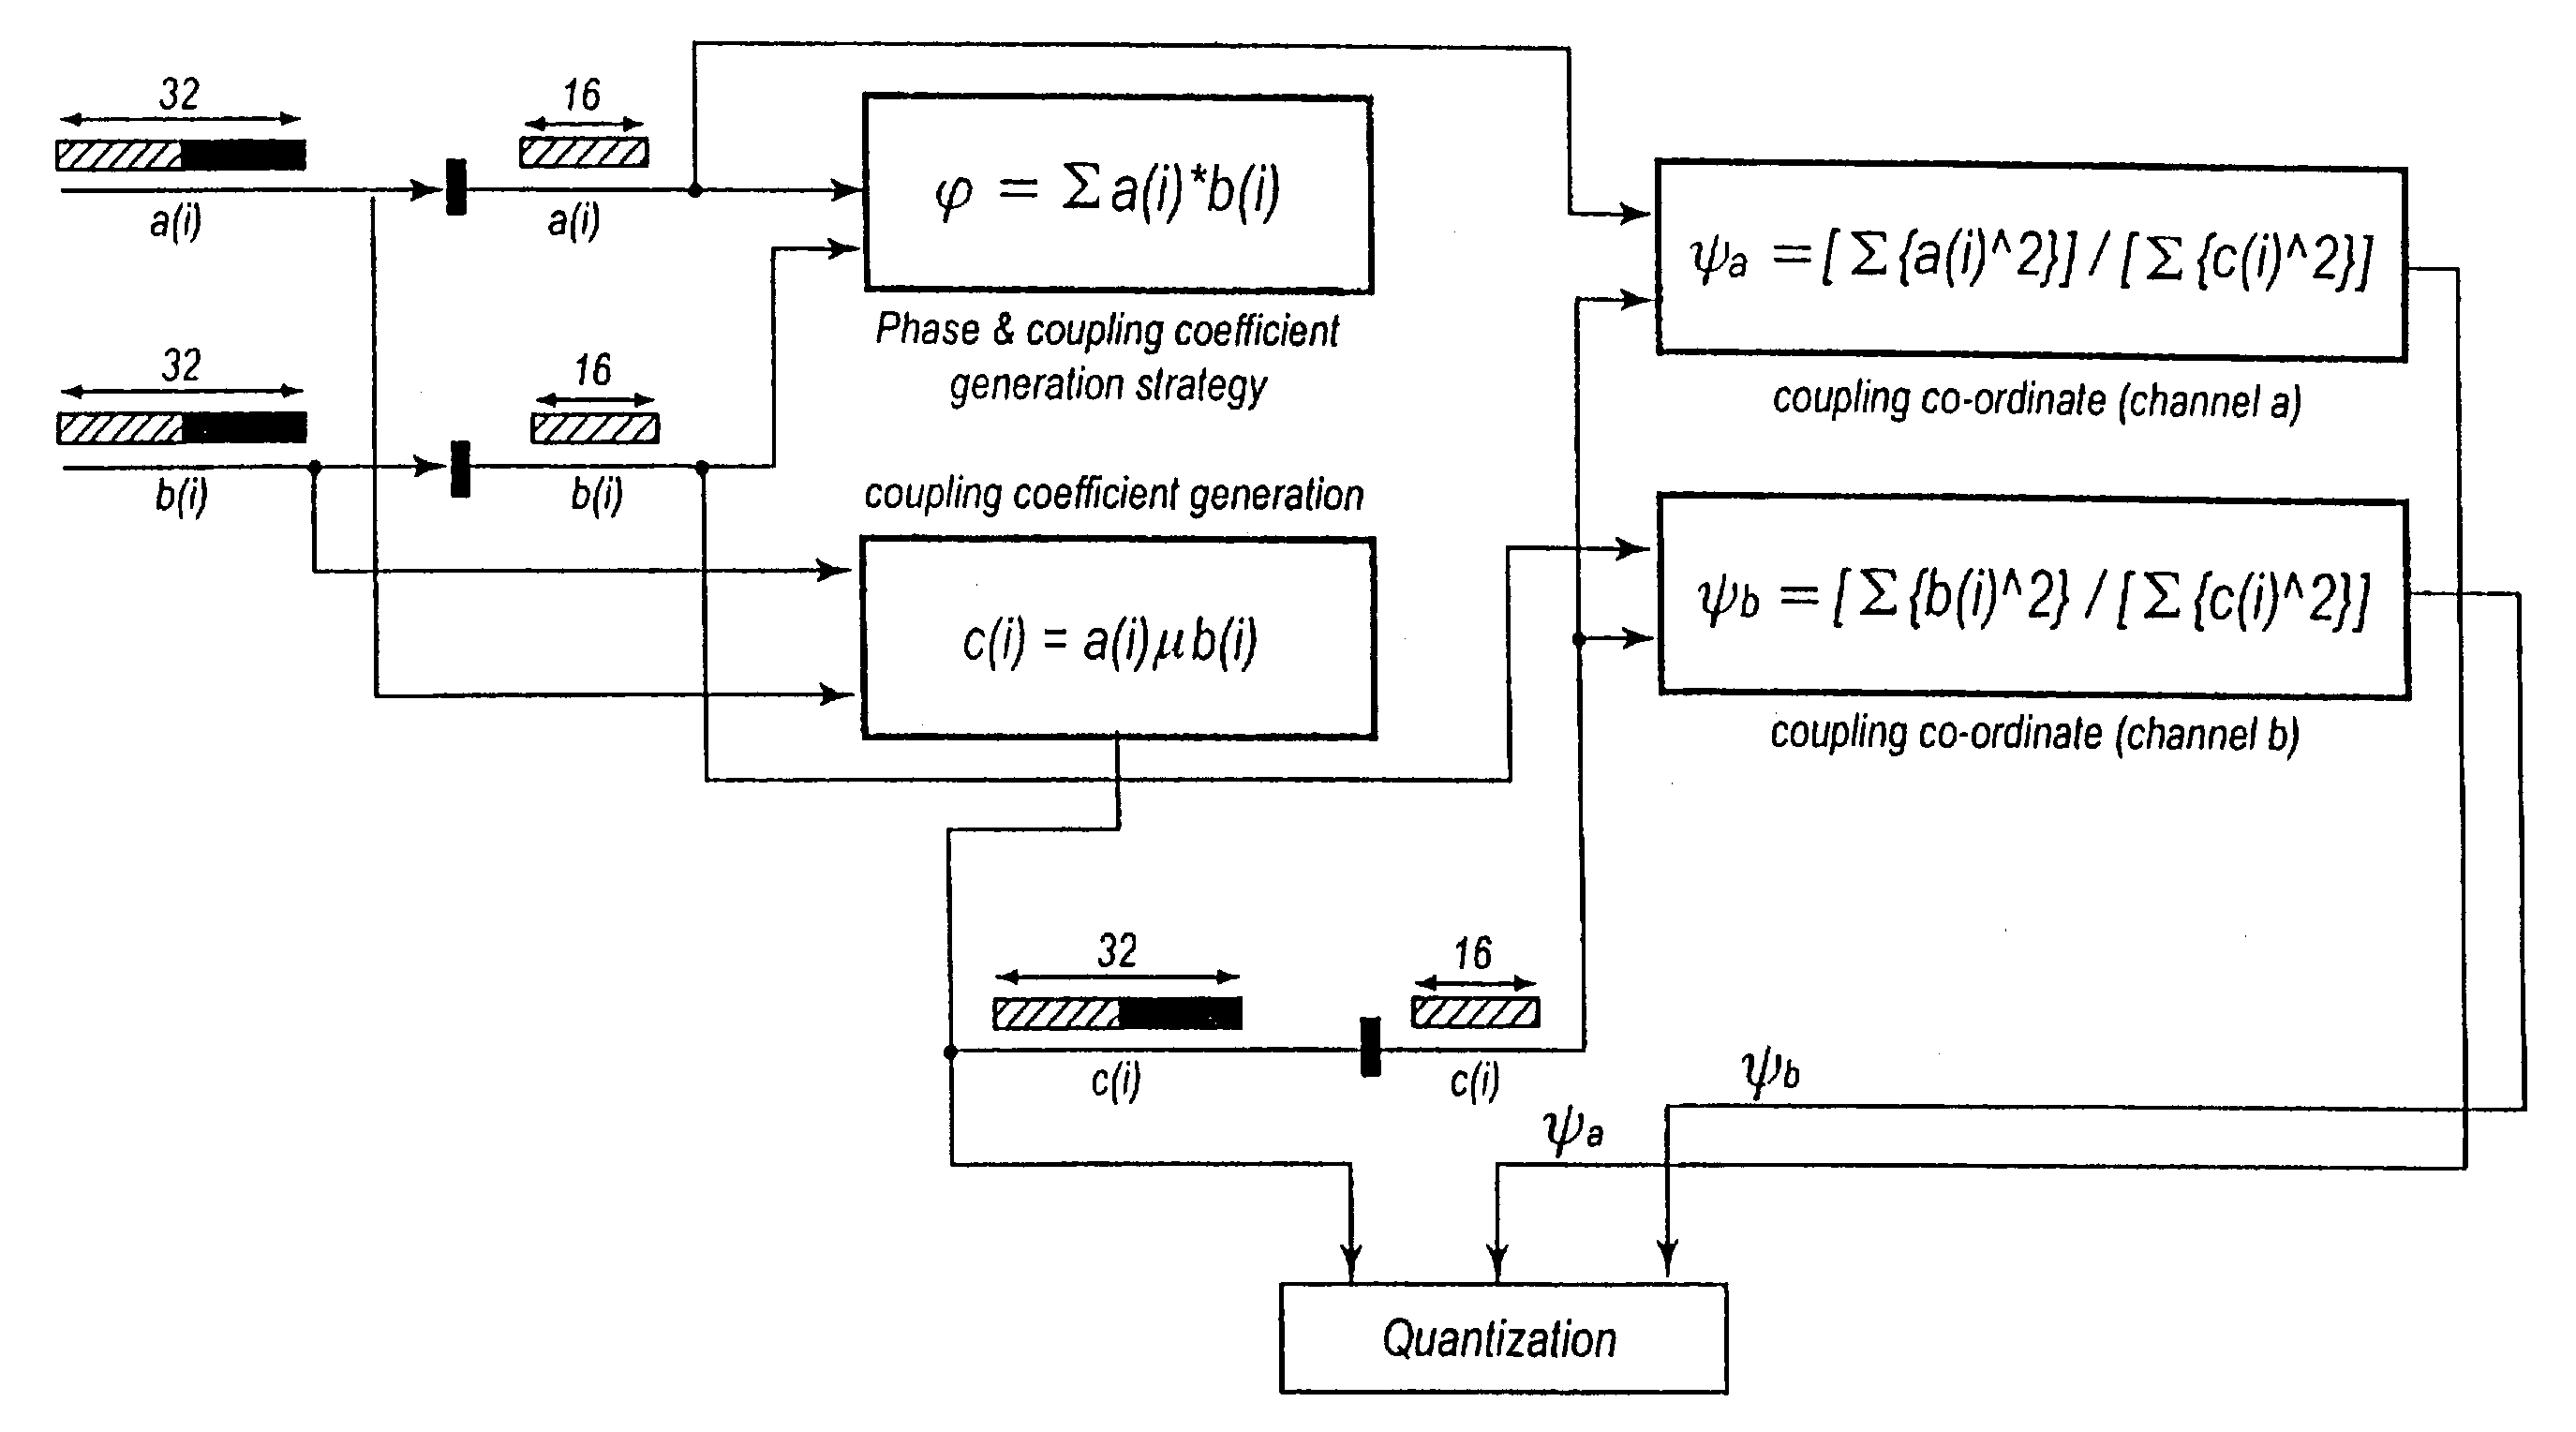 Channel coupling for an AC-3 encoder